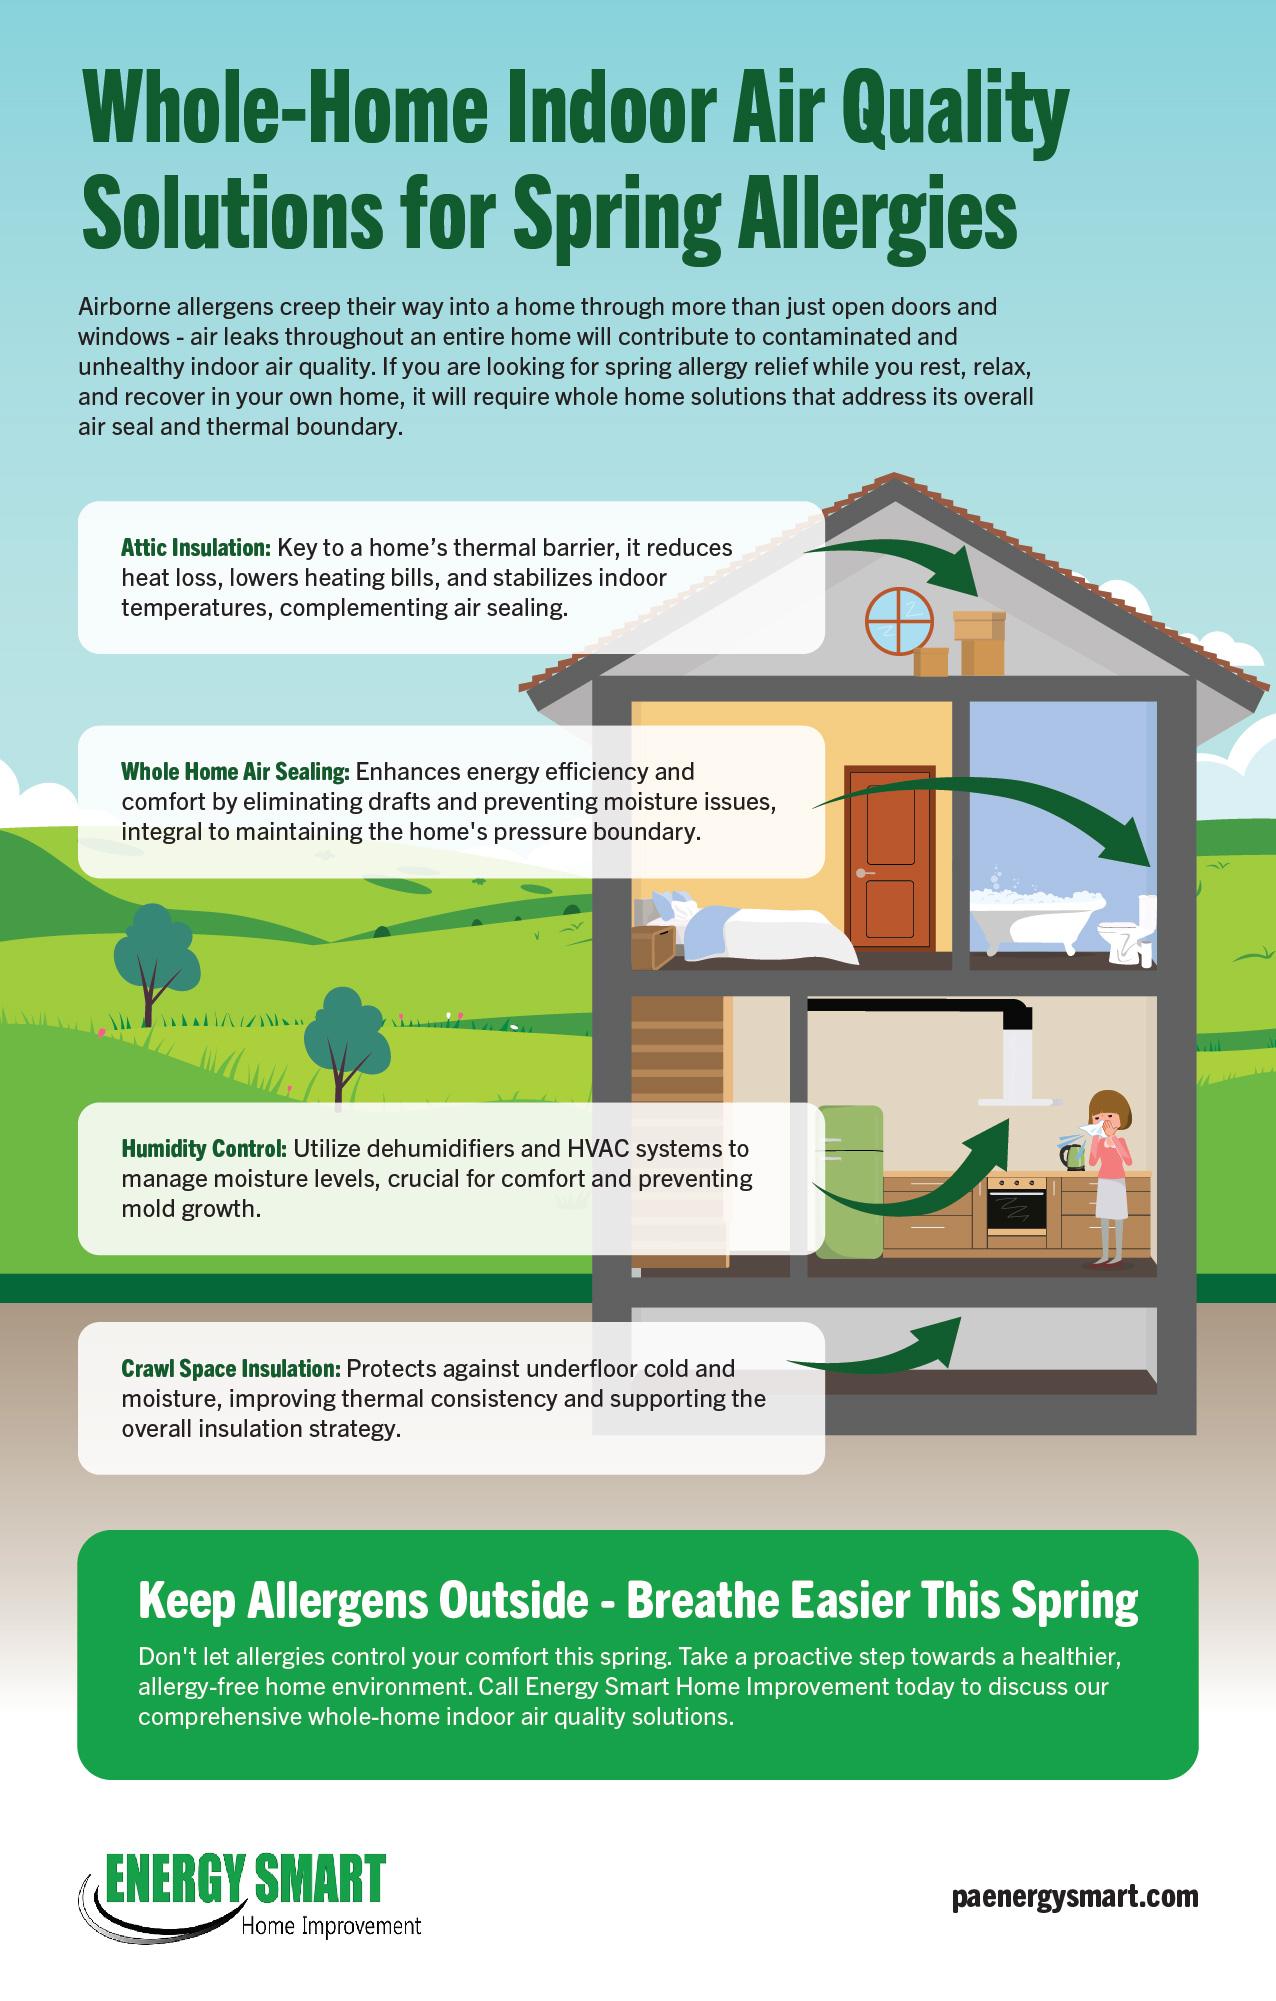 Whole-Home Indoor Air Quality Solutions for Spring Allergies infographic 